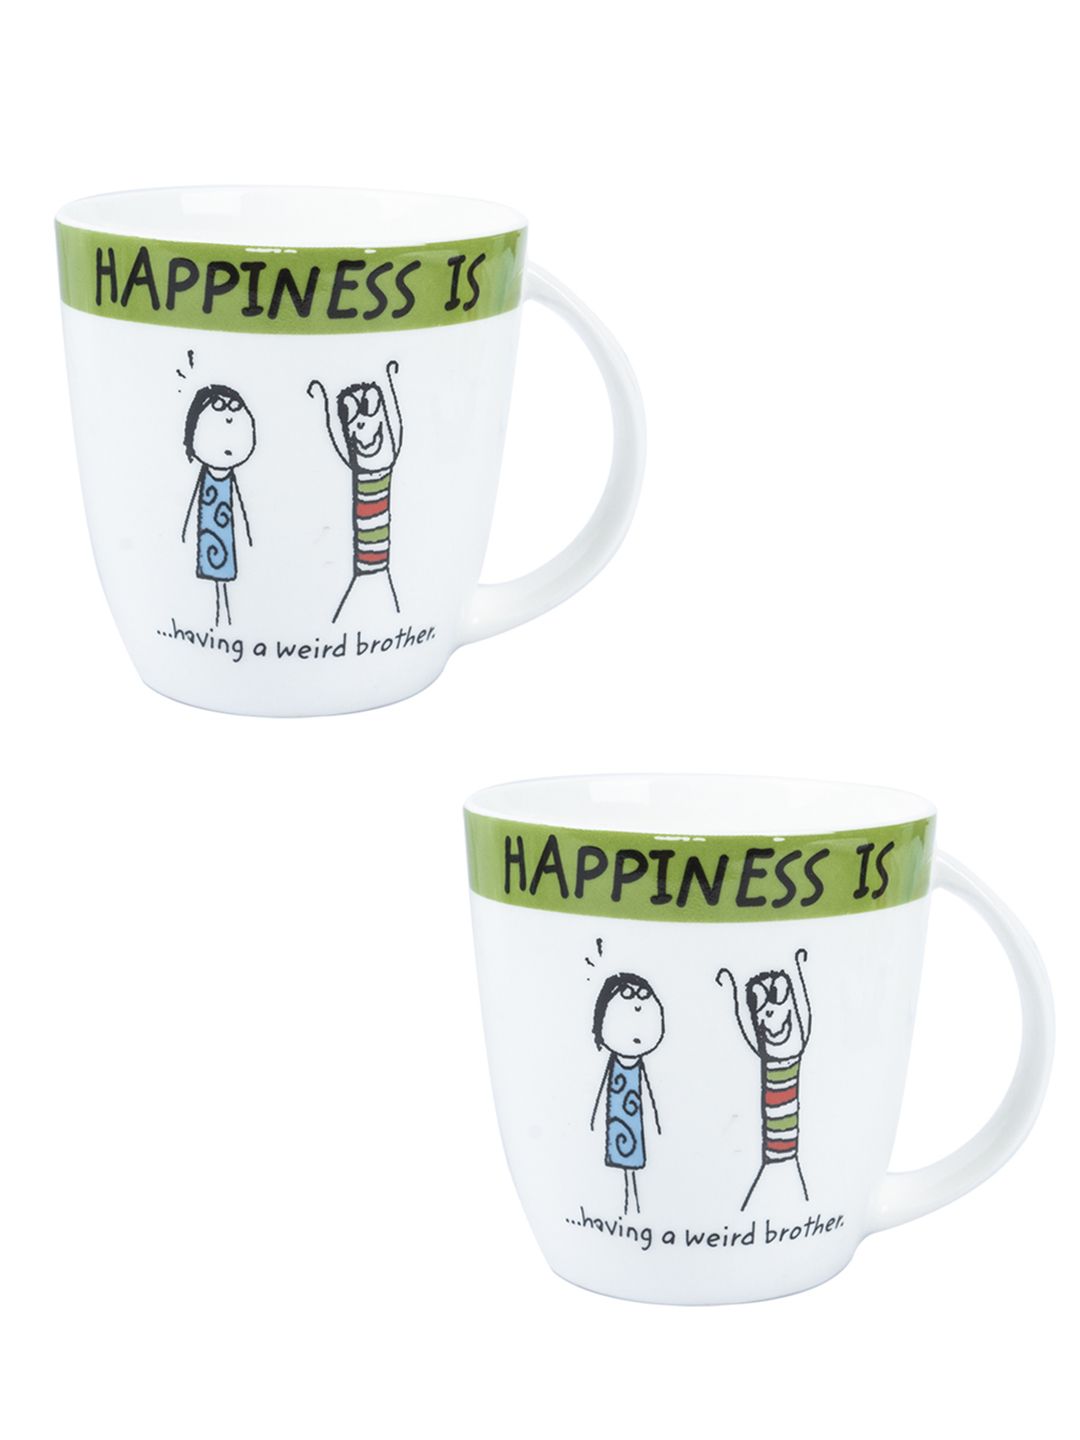 MARKET99 White Text or Slogans Printed Ceramic Glossy Mugs Set of Cups and Mugs Price in India